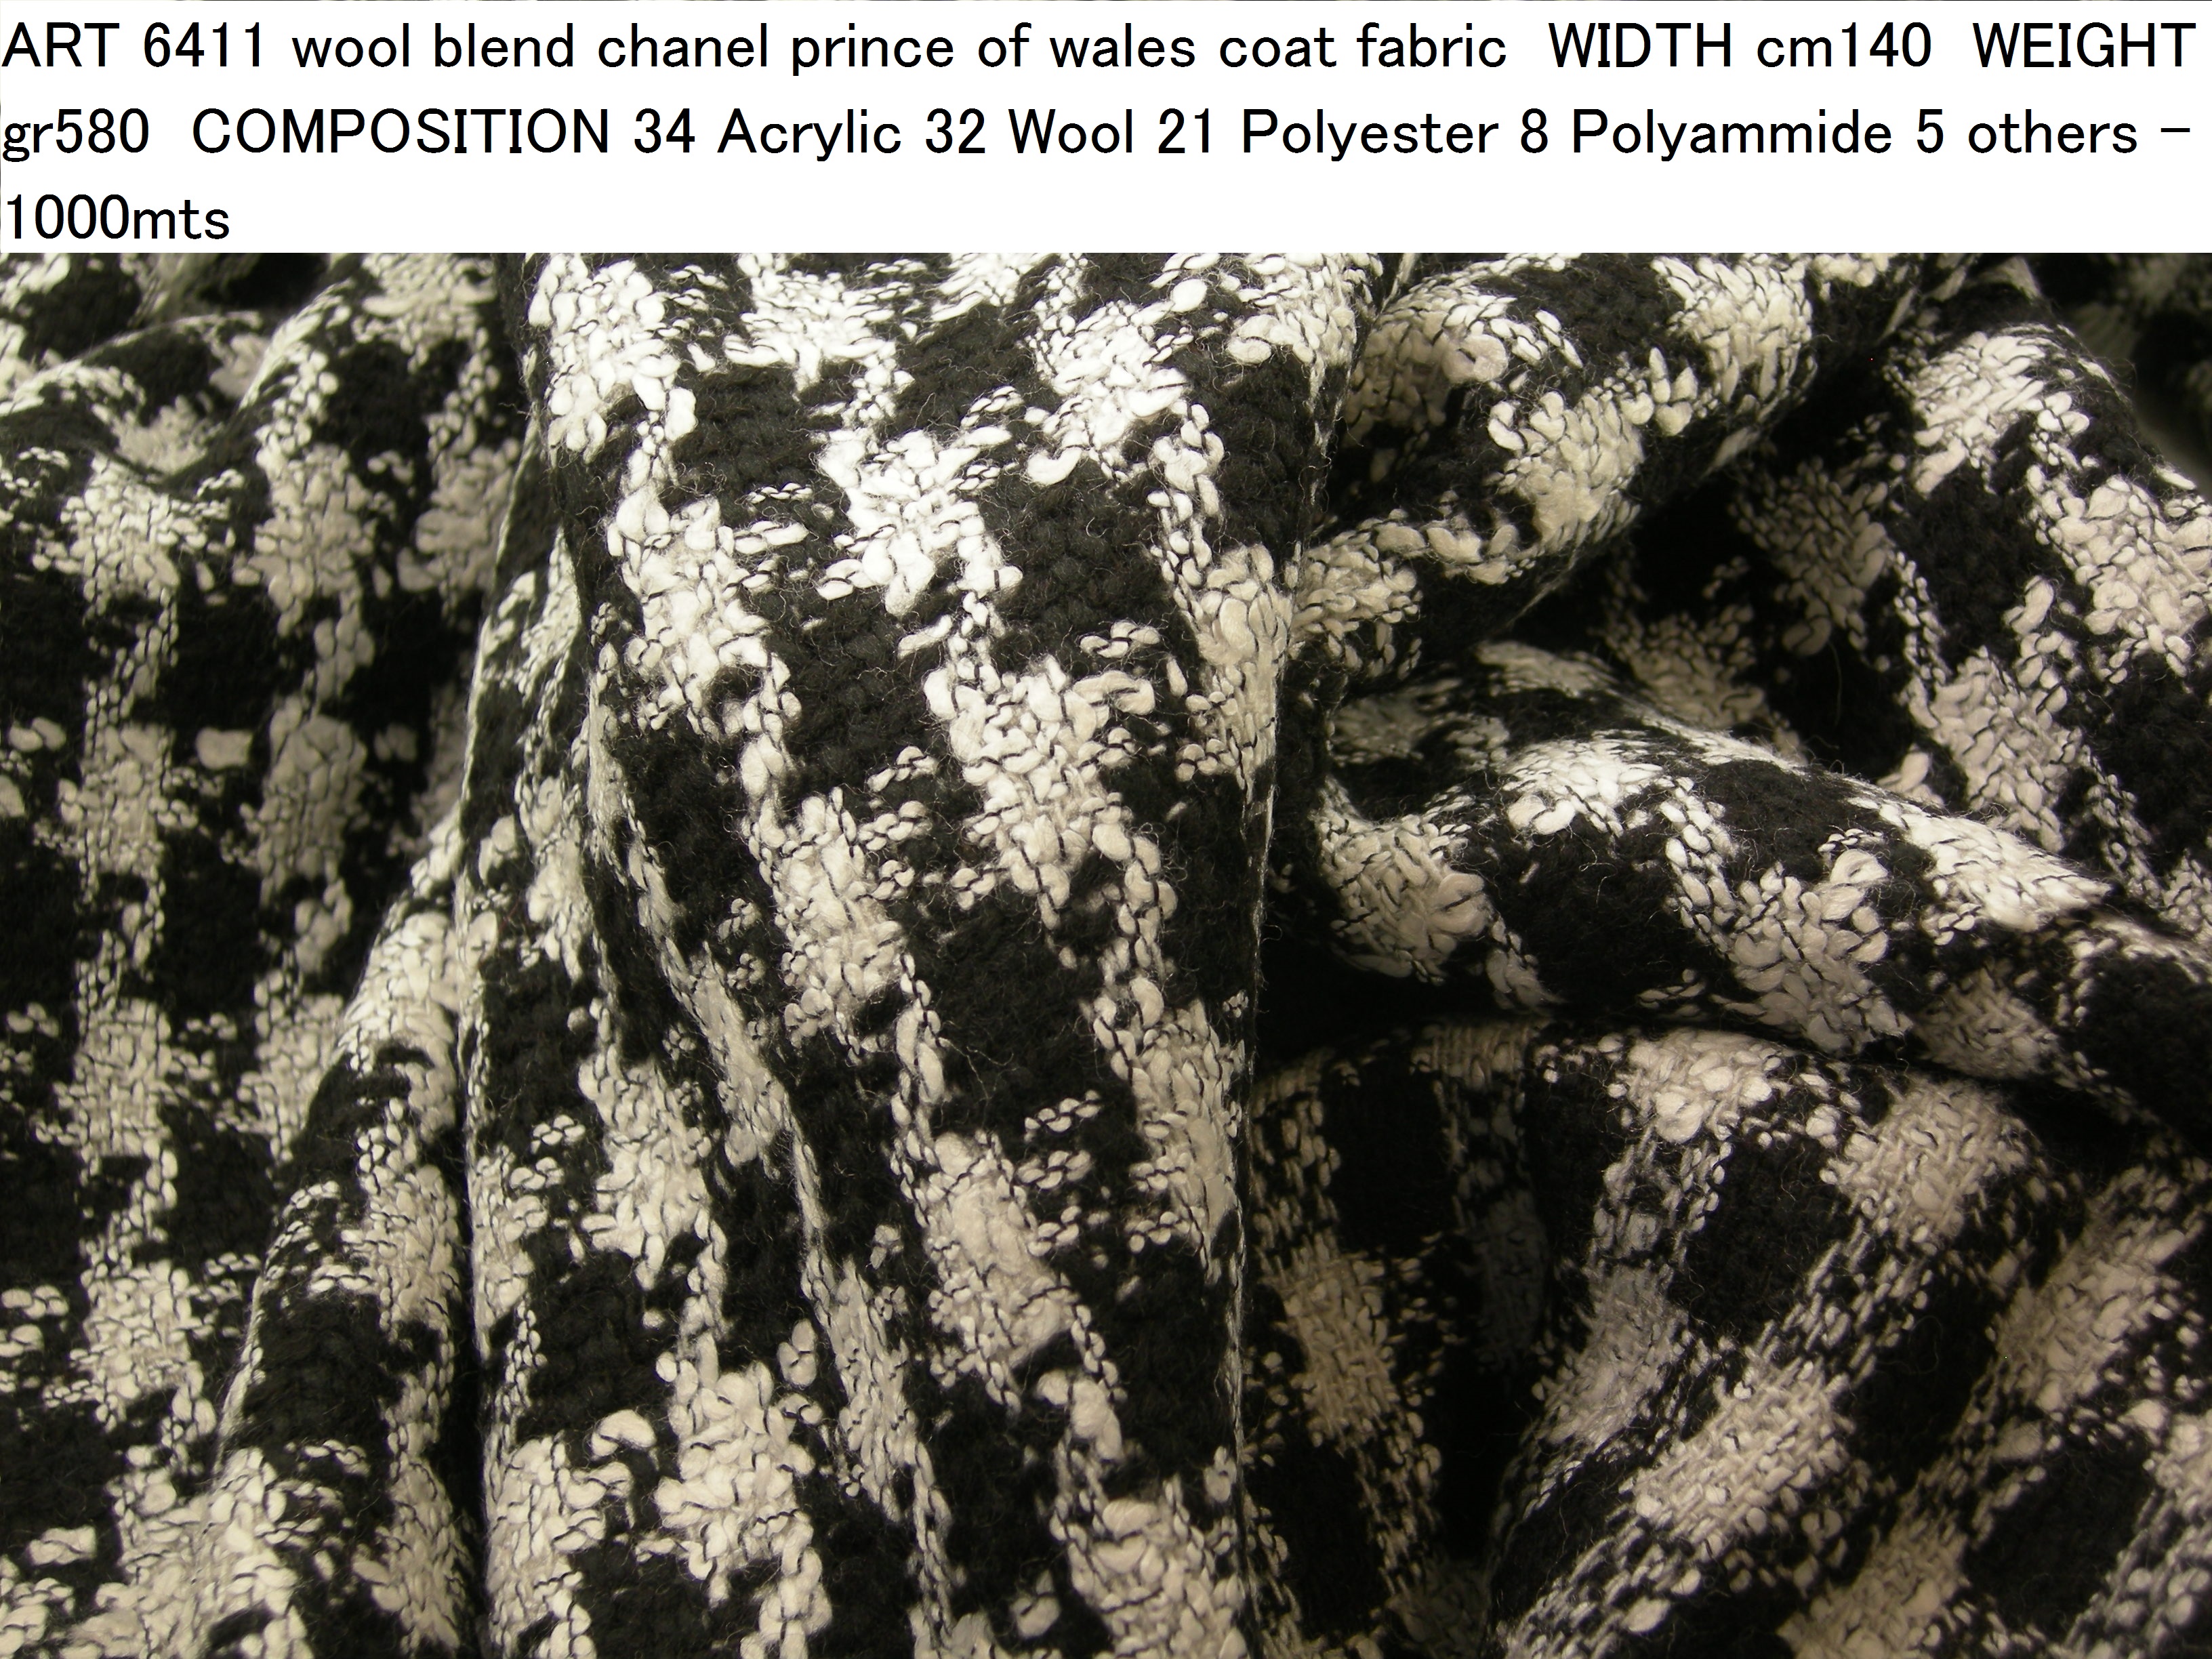 ART 6411 wool blend chanel prince of wales coat fabric WIDTH cm140 WEIGHT gr580 COMPOSITION 34 Acrylic 32 Wool 21 Polyester 8 Polyammide 5 others - 1000mts